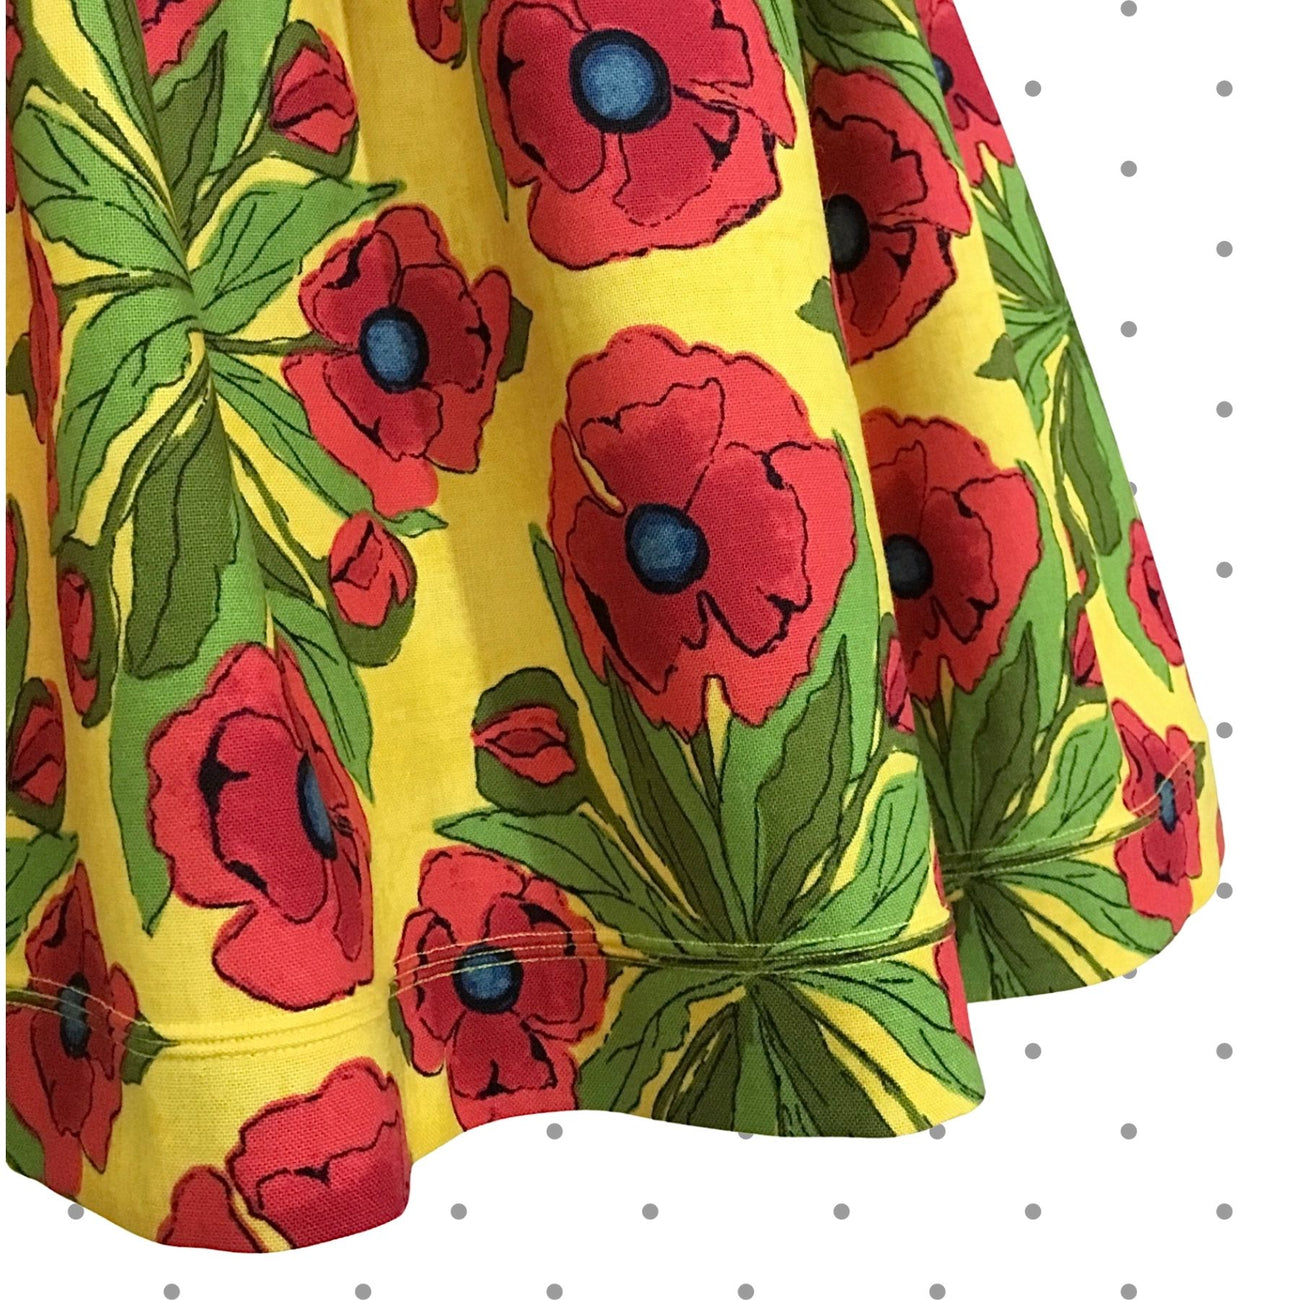 Poppin’ Poppies ~ Size 5